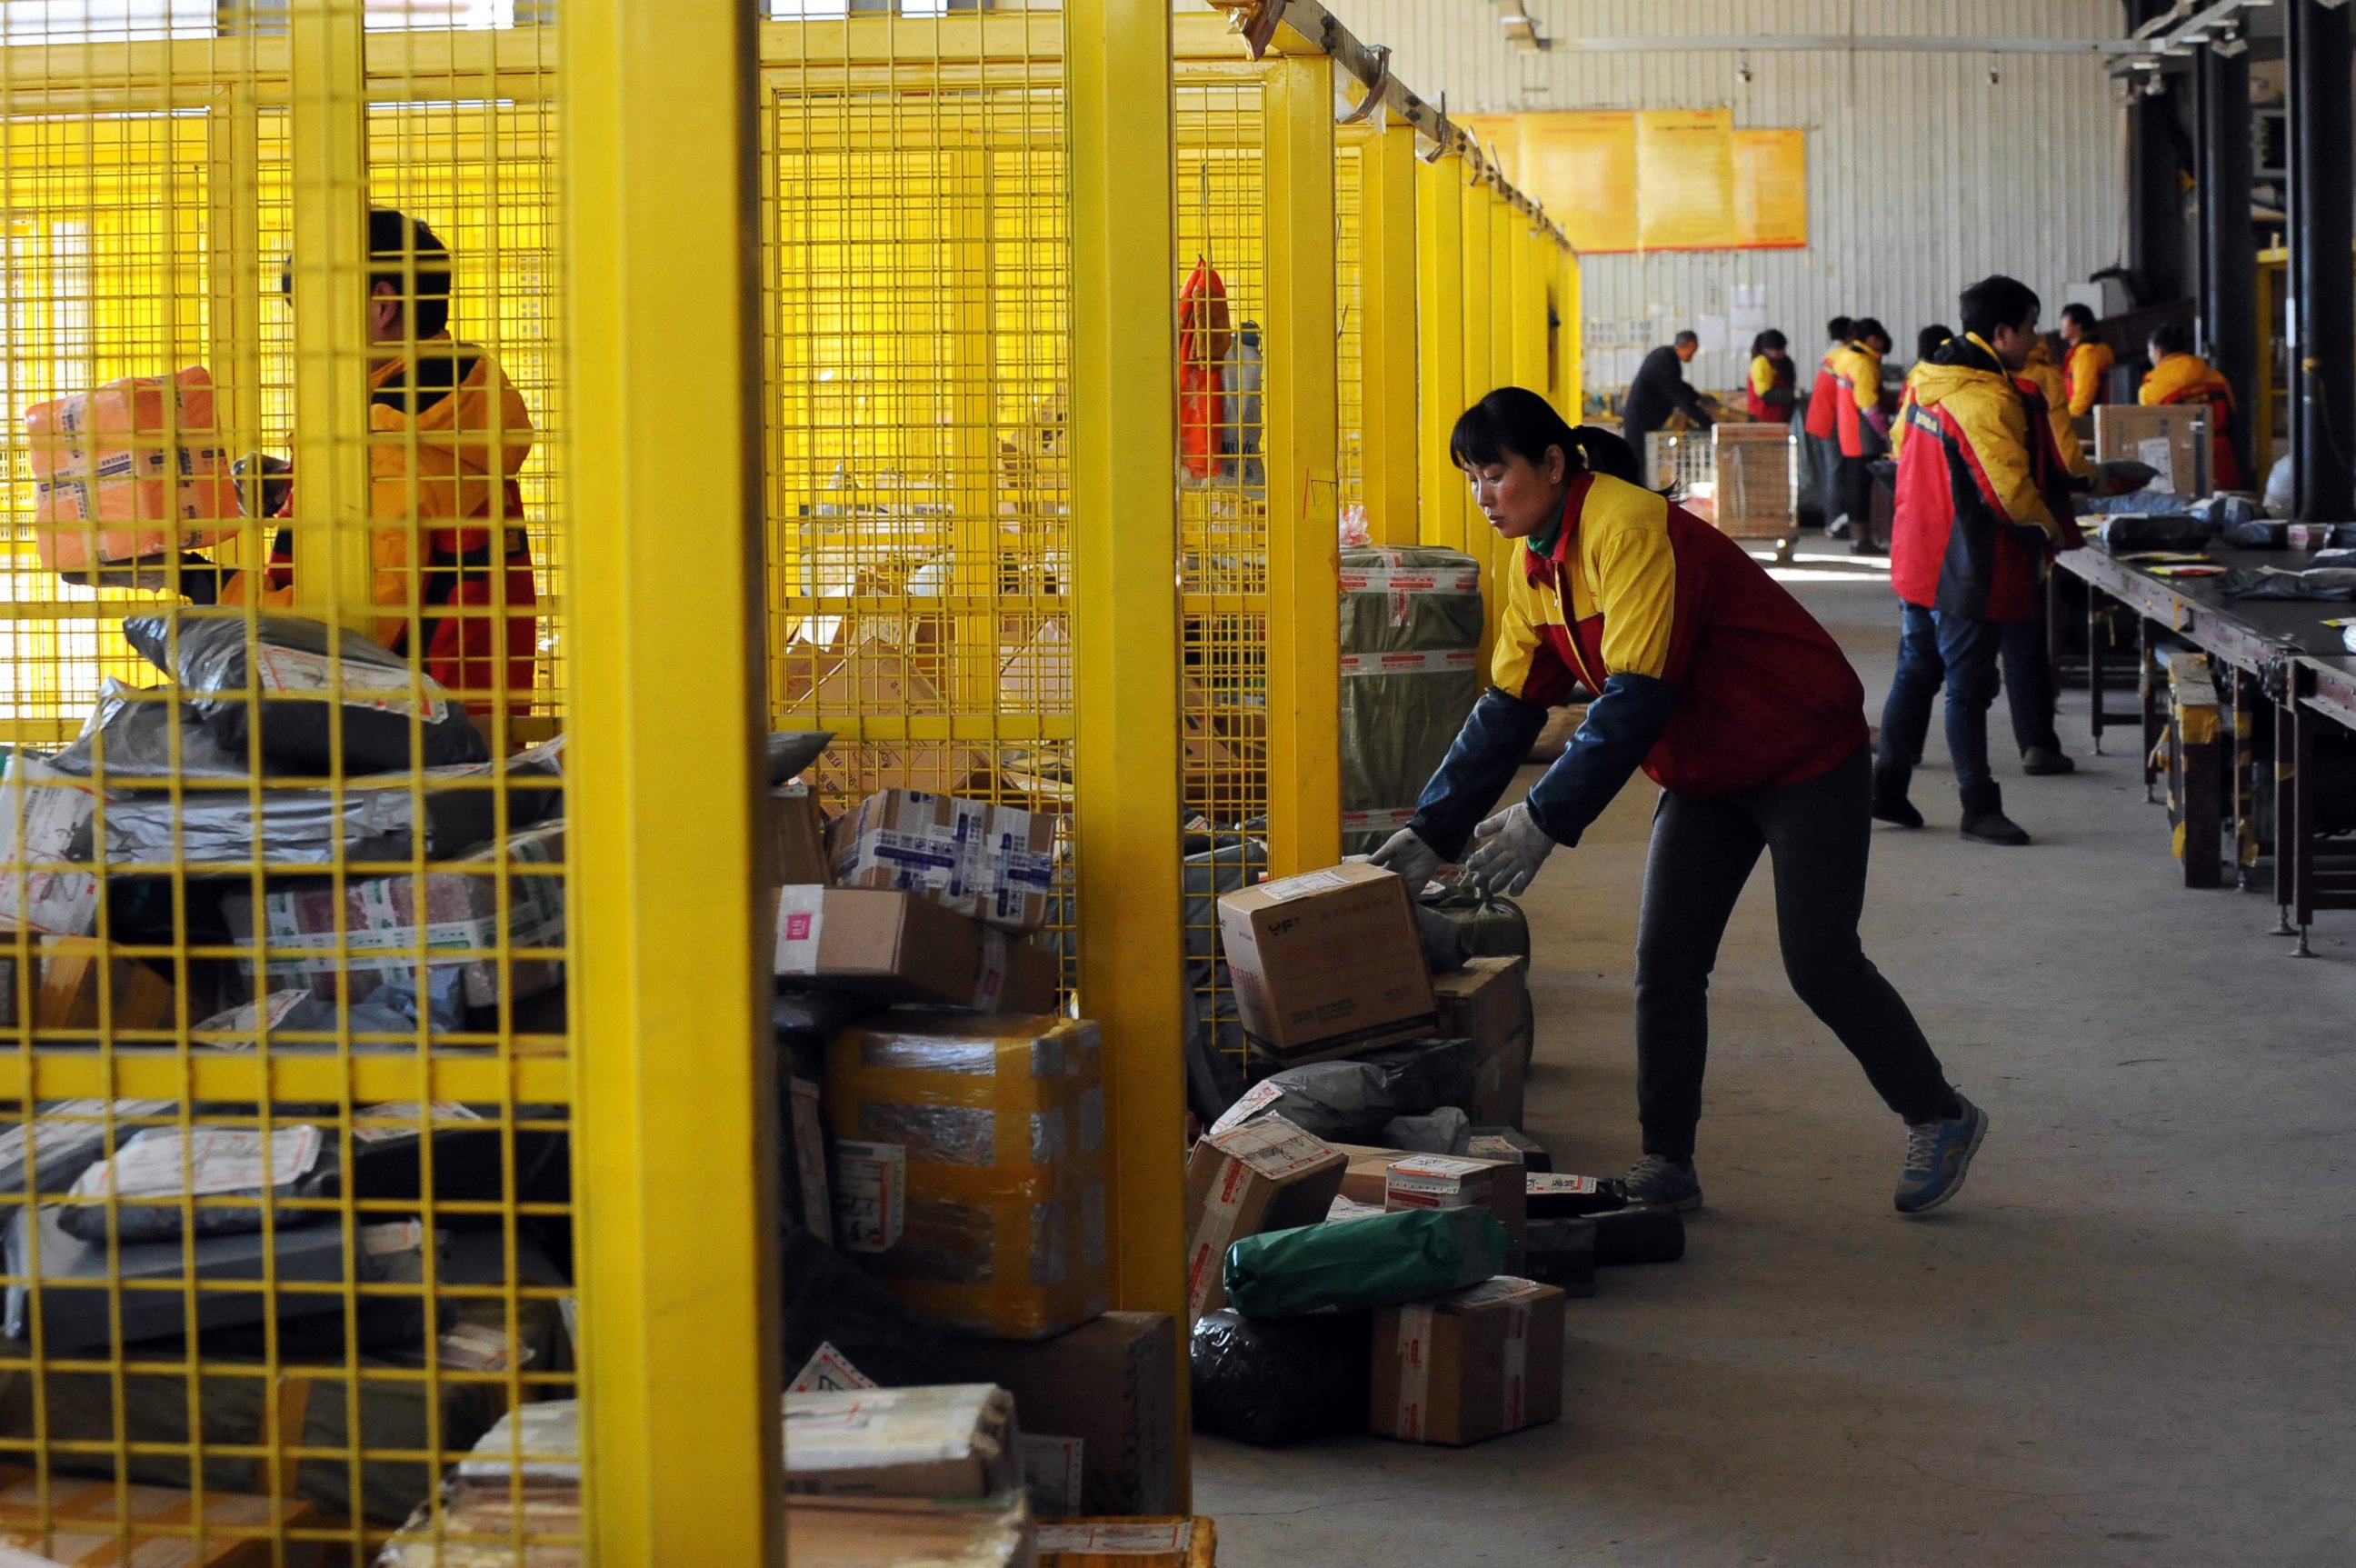 PHOTO: Workers sort out packages at an express delivery company in Beijing, Nov. 12, 2013, after "Singles Day" e-tailer festival on Nov. 11.